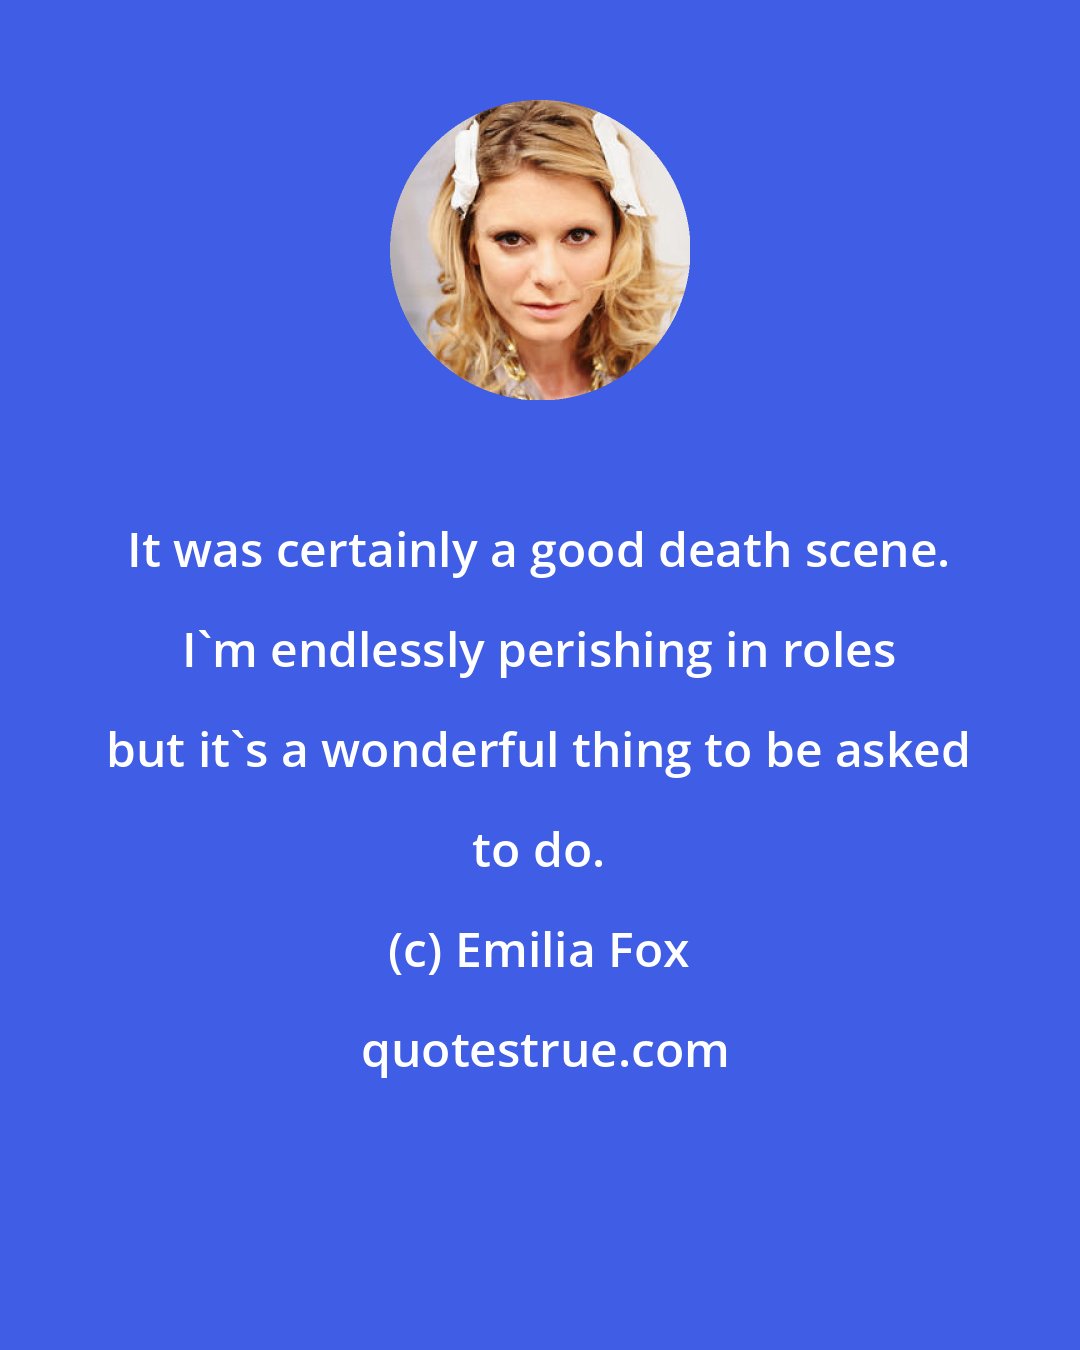 Emilia Fox: It was certainly a good death scene. I'm endlessly perishing in roles but it's a wonderful thing to be asked to do.